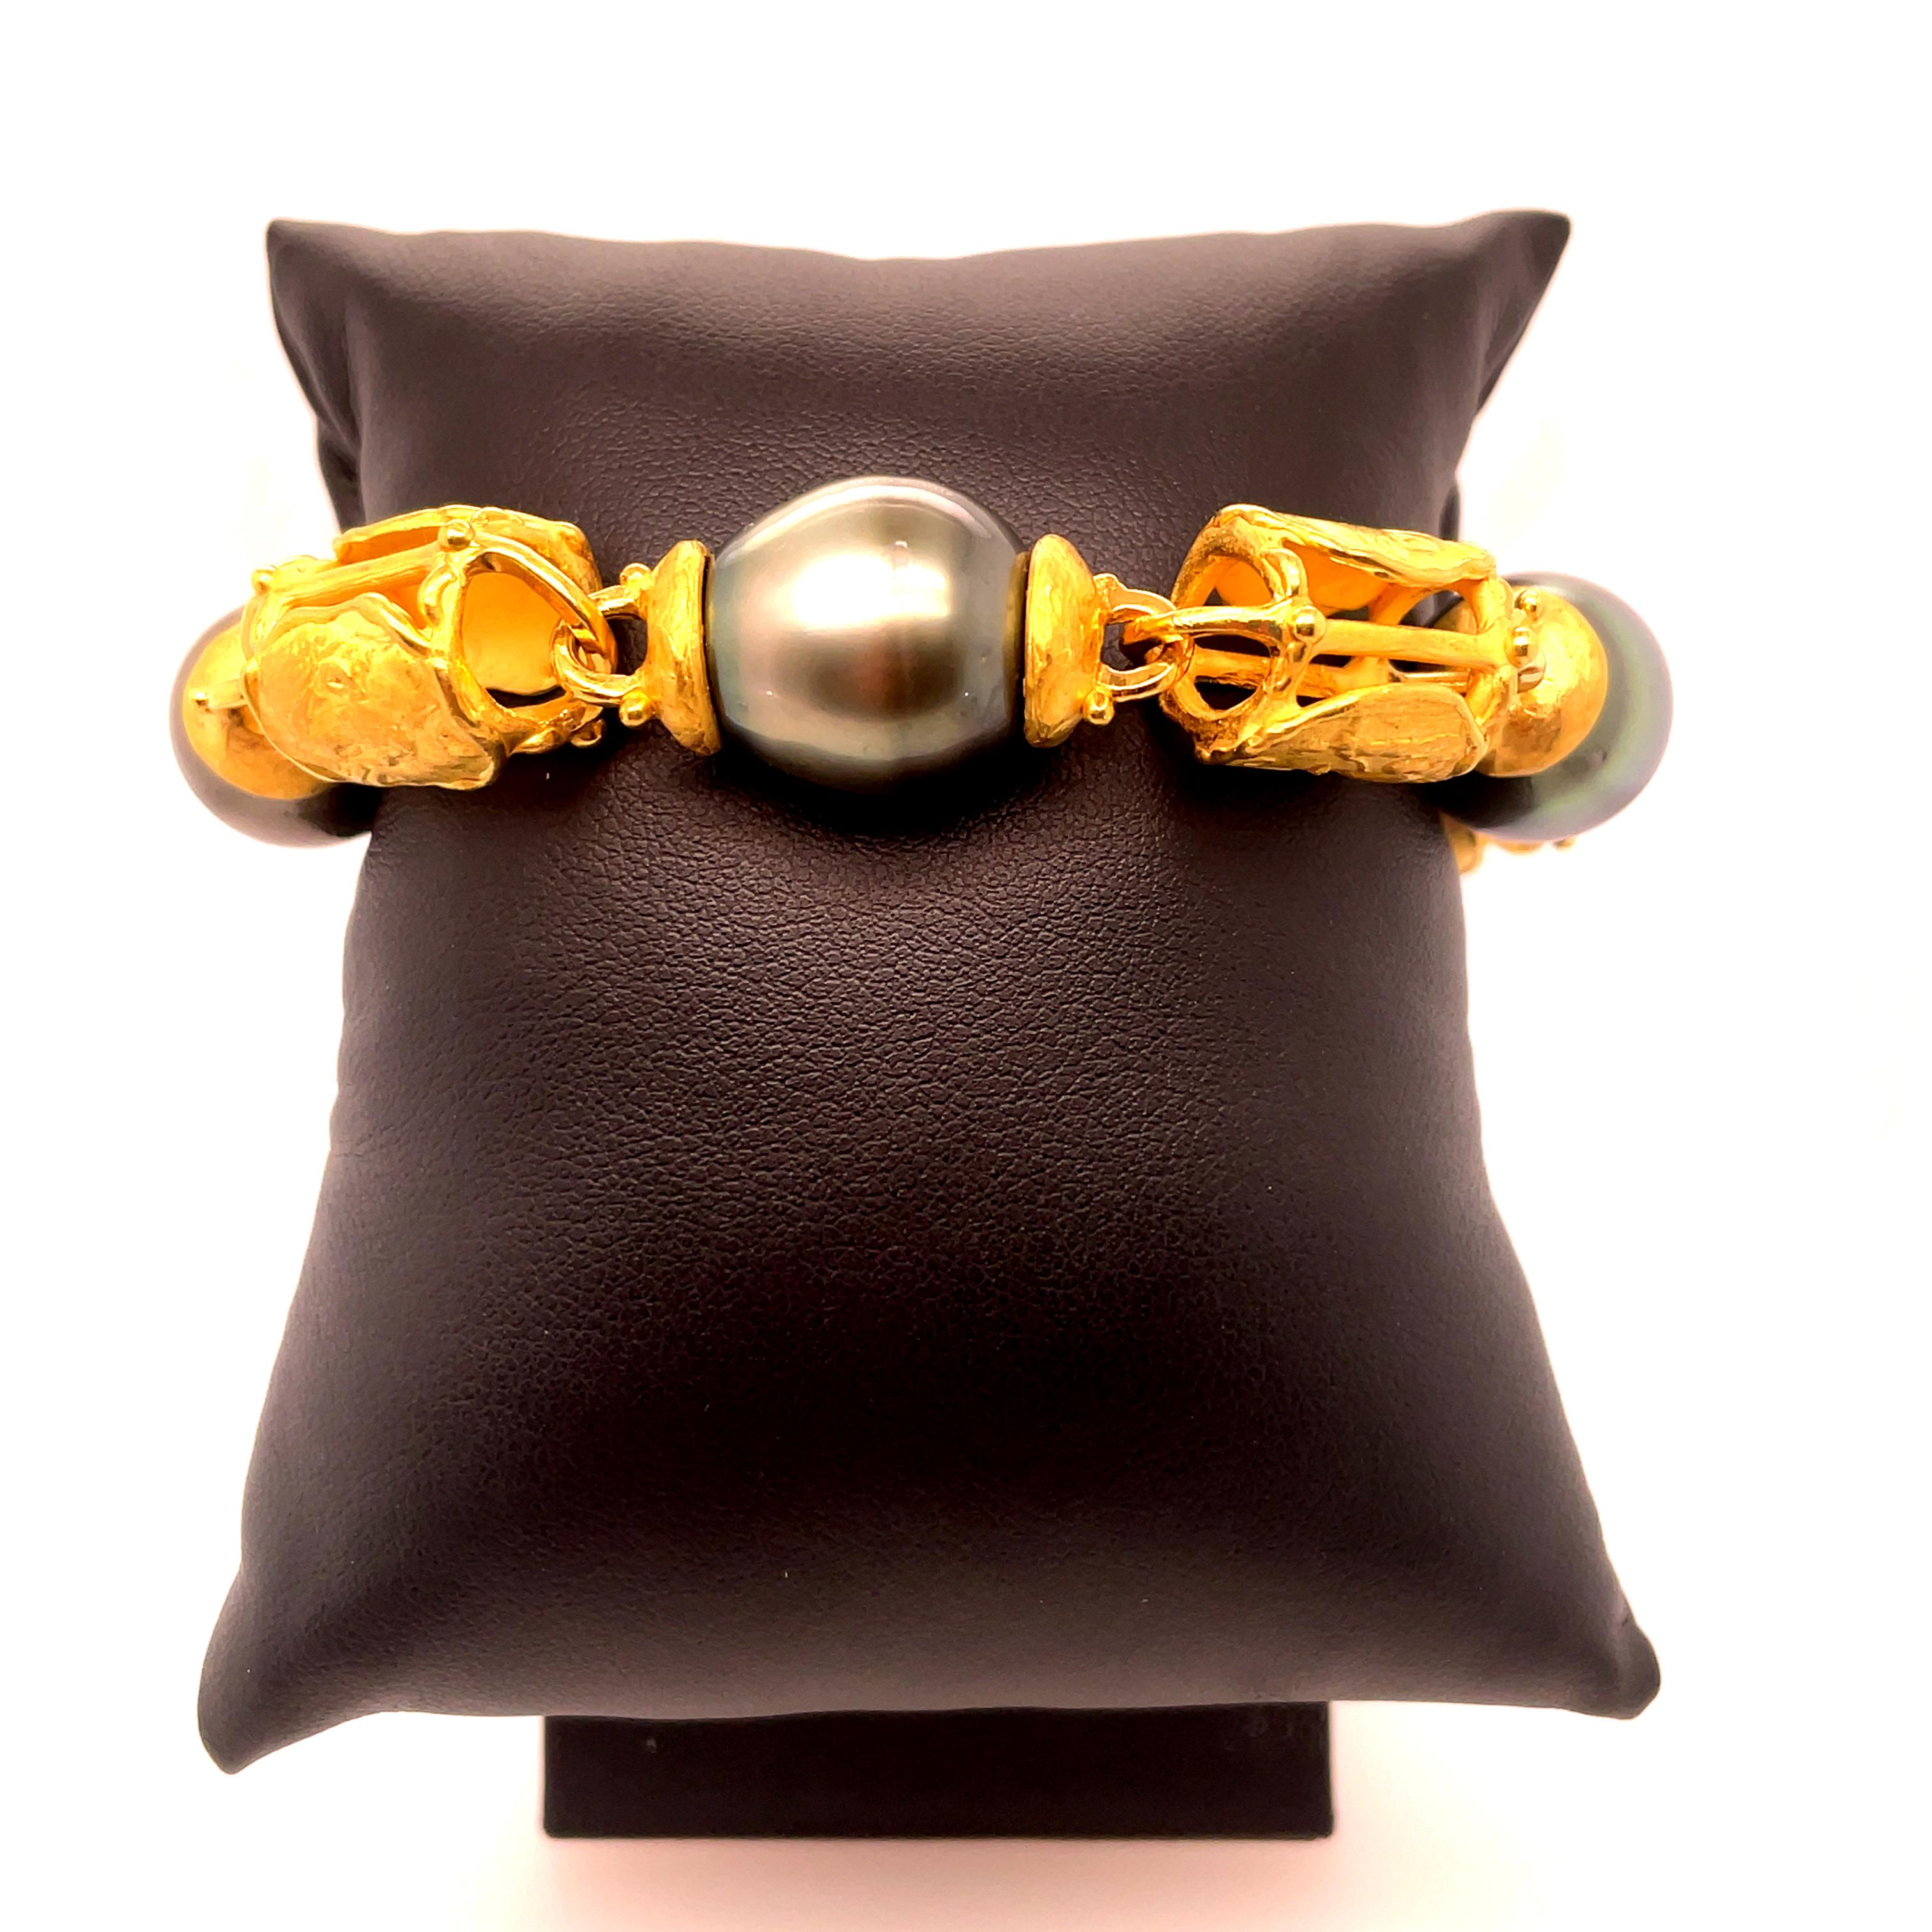 Made from 22kt yellow gold, the stunning Denise Roberge bracelet is the perfect bracelet with 4 Tahitian pearls.